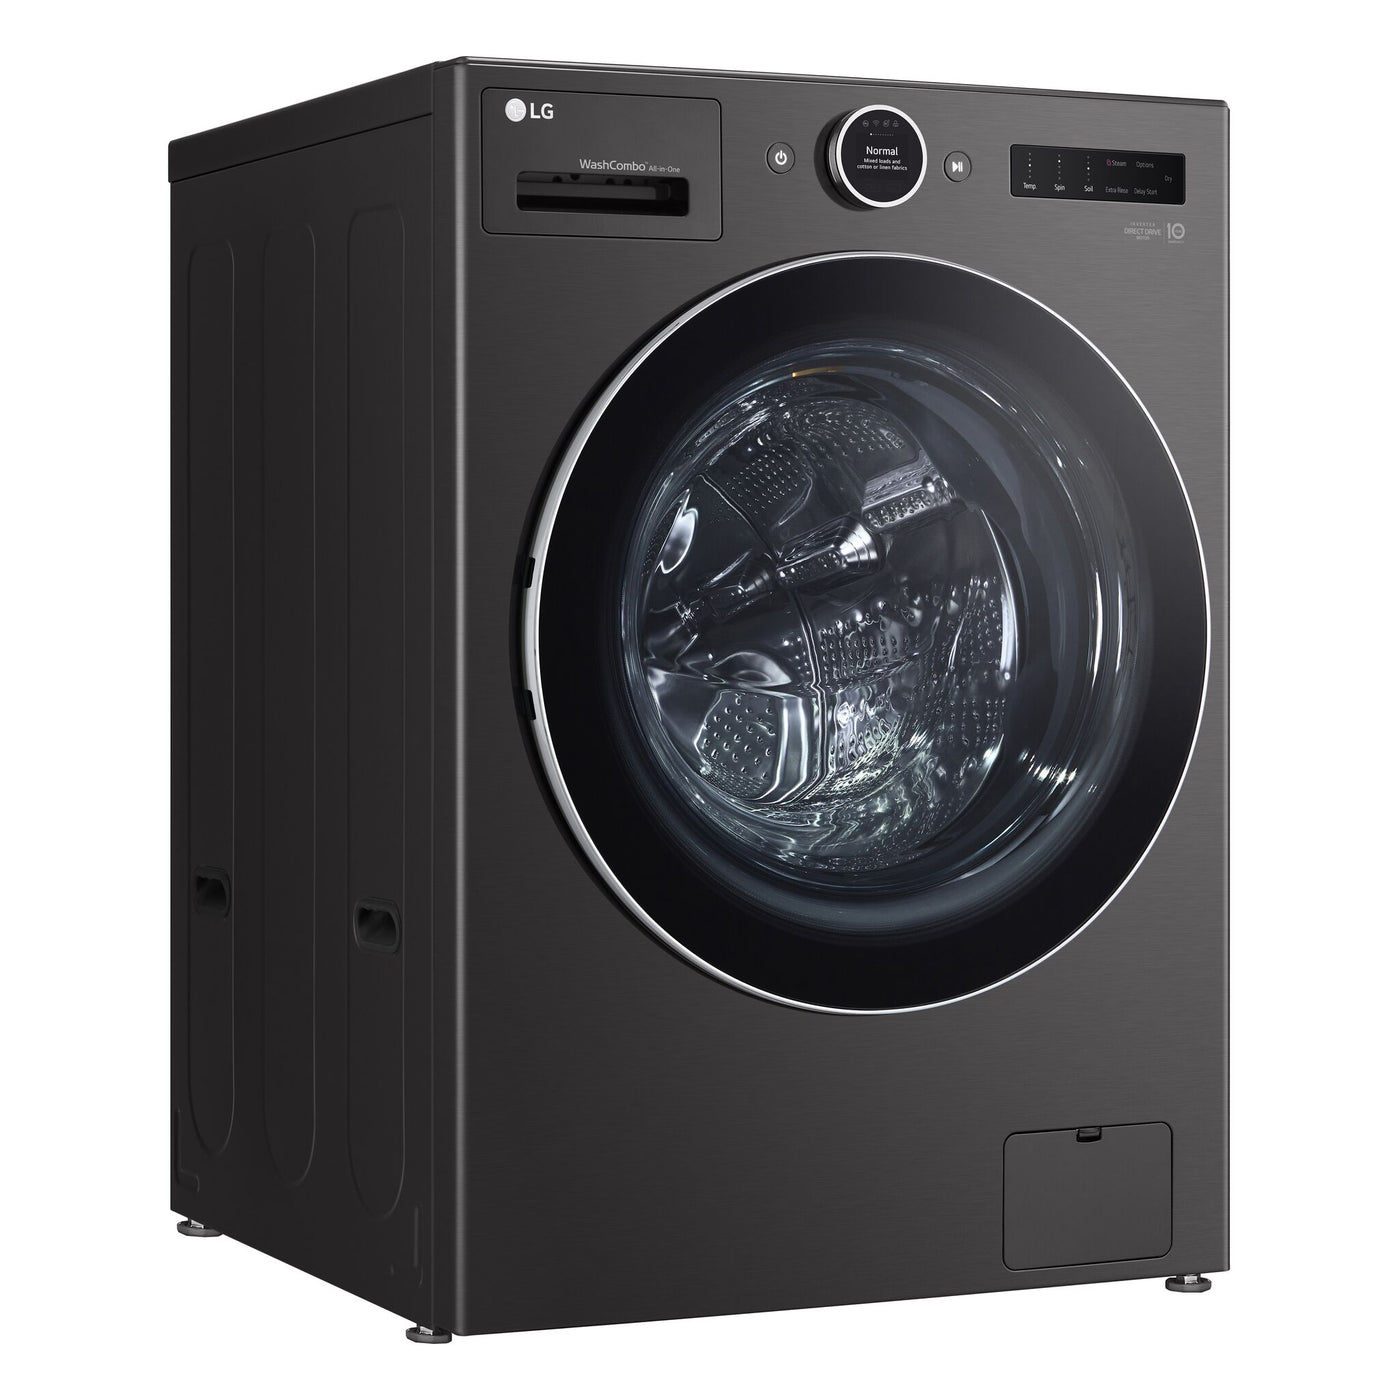 LG Black Steel All-in-One Ventless Washer/Dryer Combo with Inverter HeatPump™ Technology and Direct Drive Motor (5.8 cu. ft. - WM6998HBA